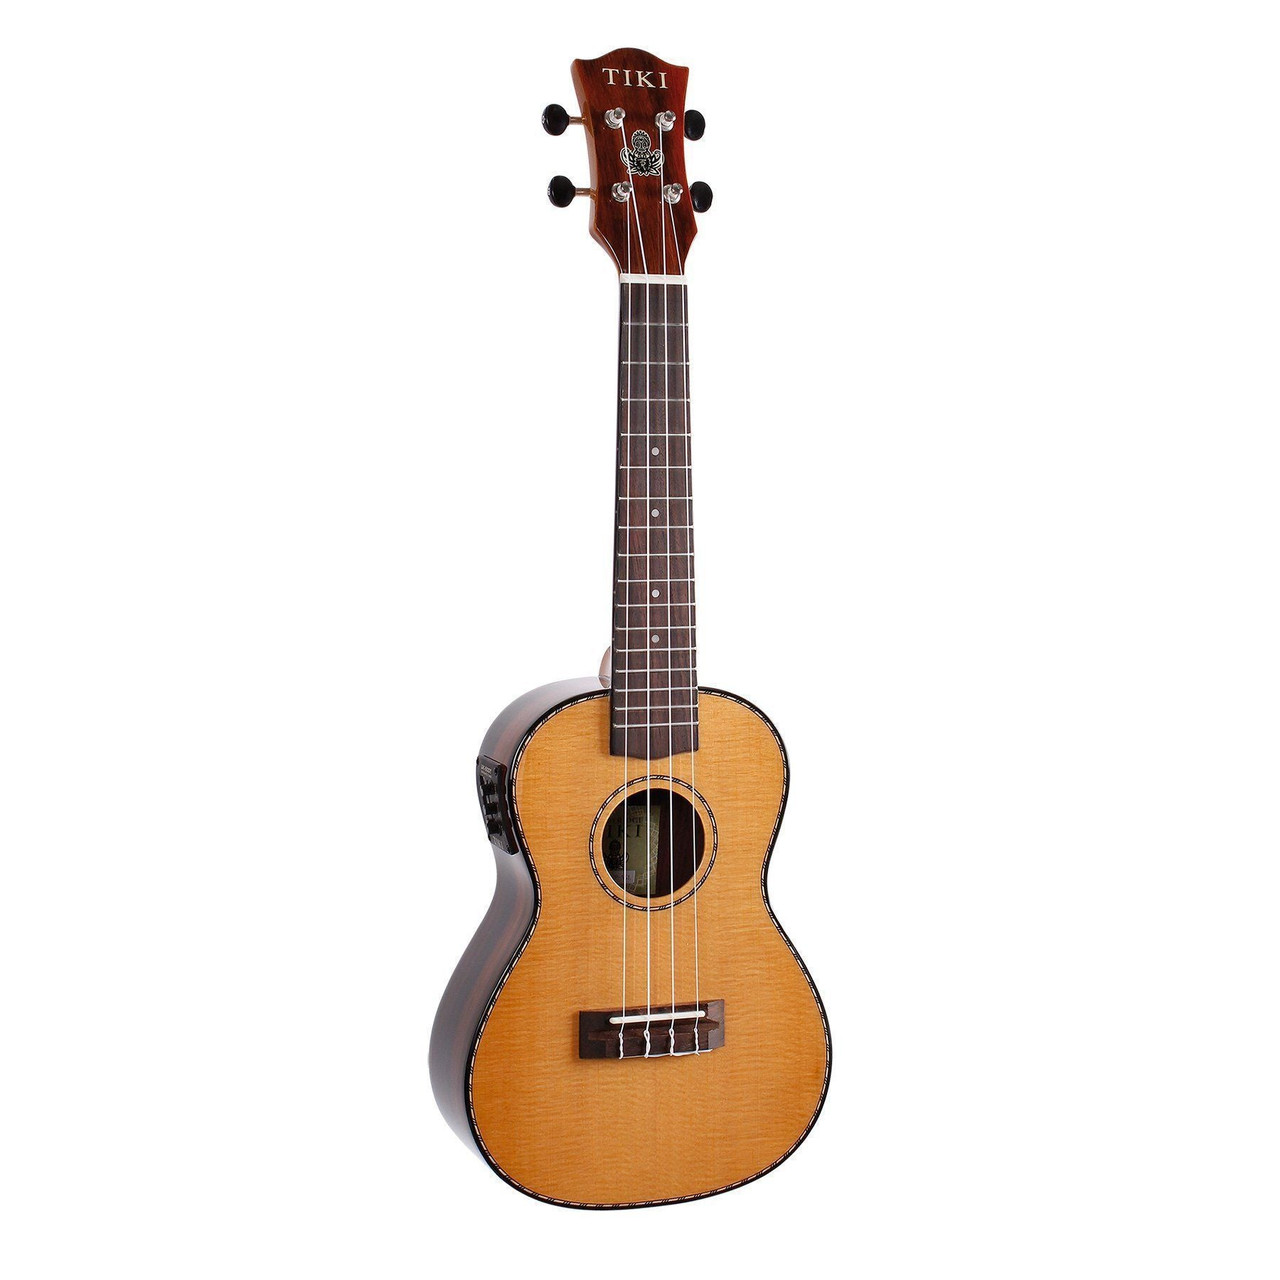 https://cdn.shopify.com/s/files/1/1636/6967/products/Tiki-22-Series-Spruce-Solid-Top-Electric-Concert-Ukulele-with-Hard-Case-Natural-Gloss-TSC-22P-NGL-3_f7a566b7-d7fc-4d99-8dc7-757b129c109a.jpg?v=1629222305